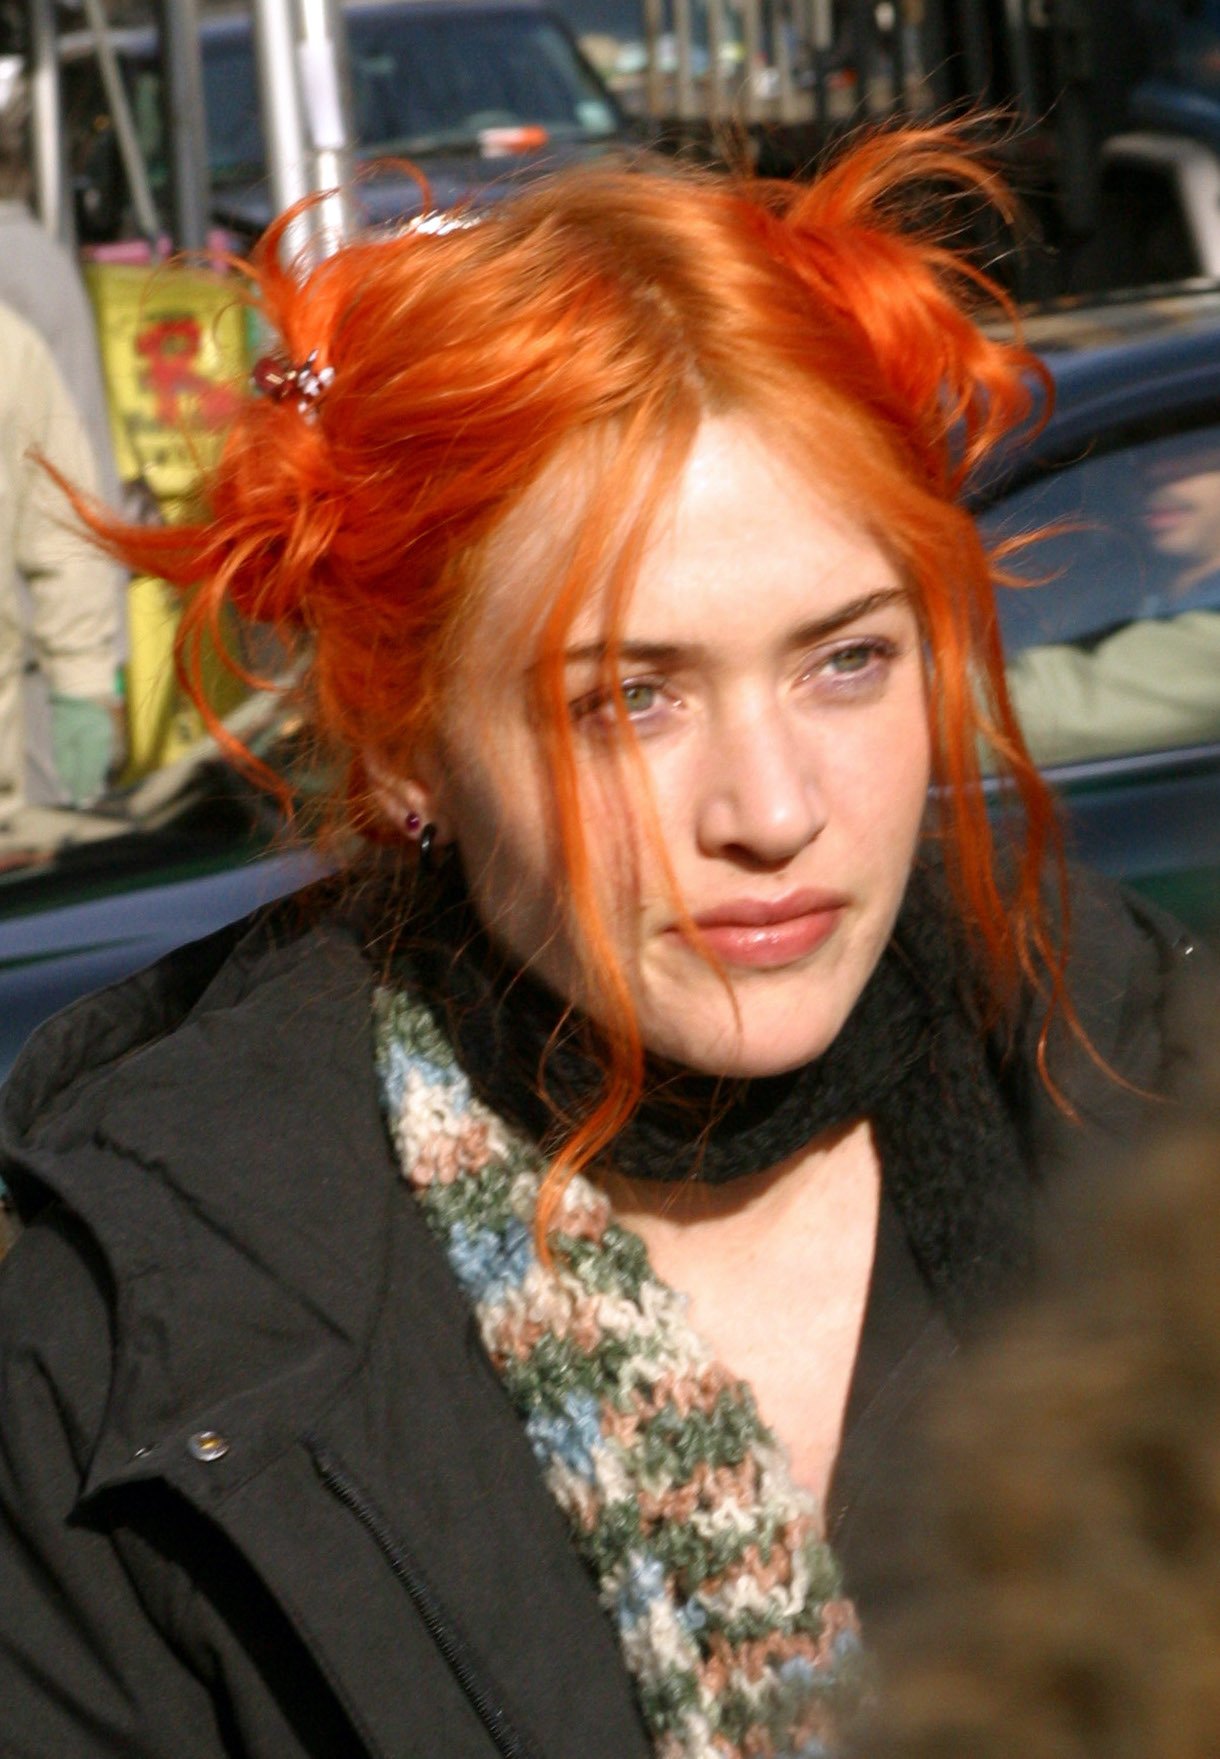 Kate Winslet On Location for 'Eternal Sunshine of the Spotless Mind' - New York